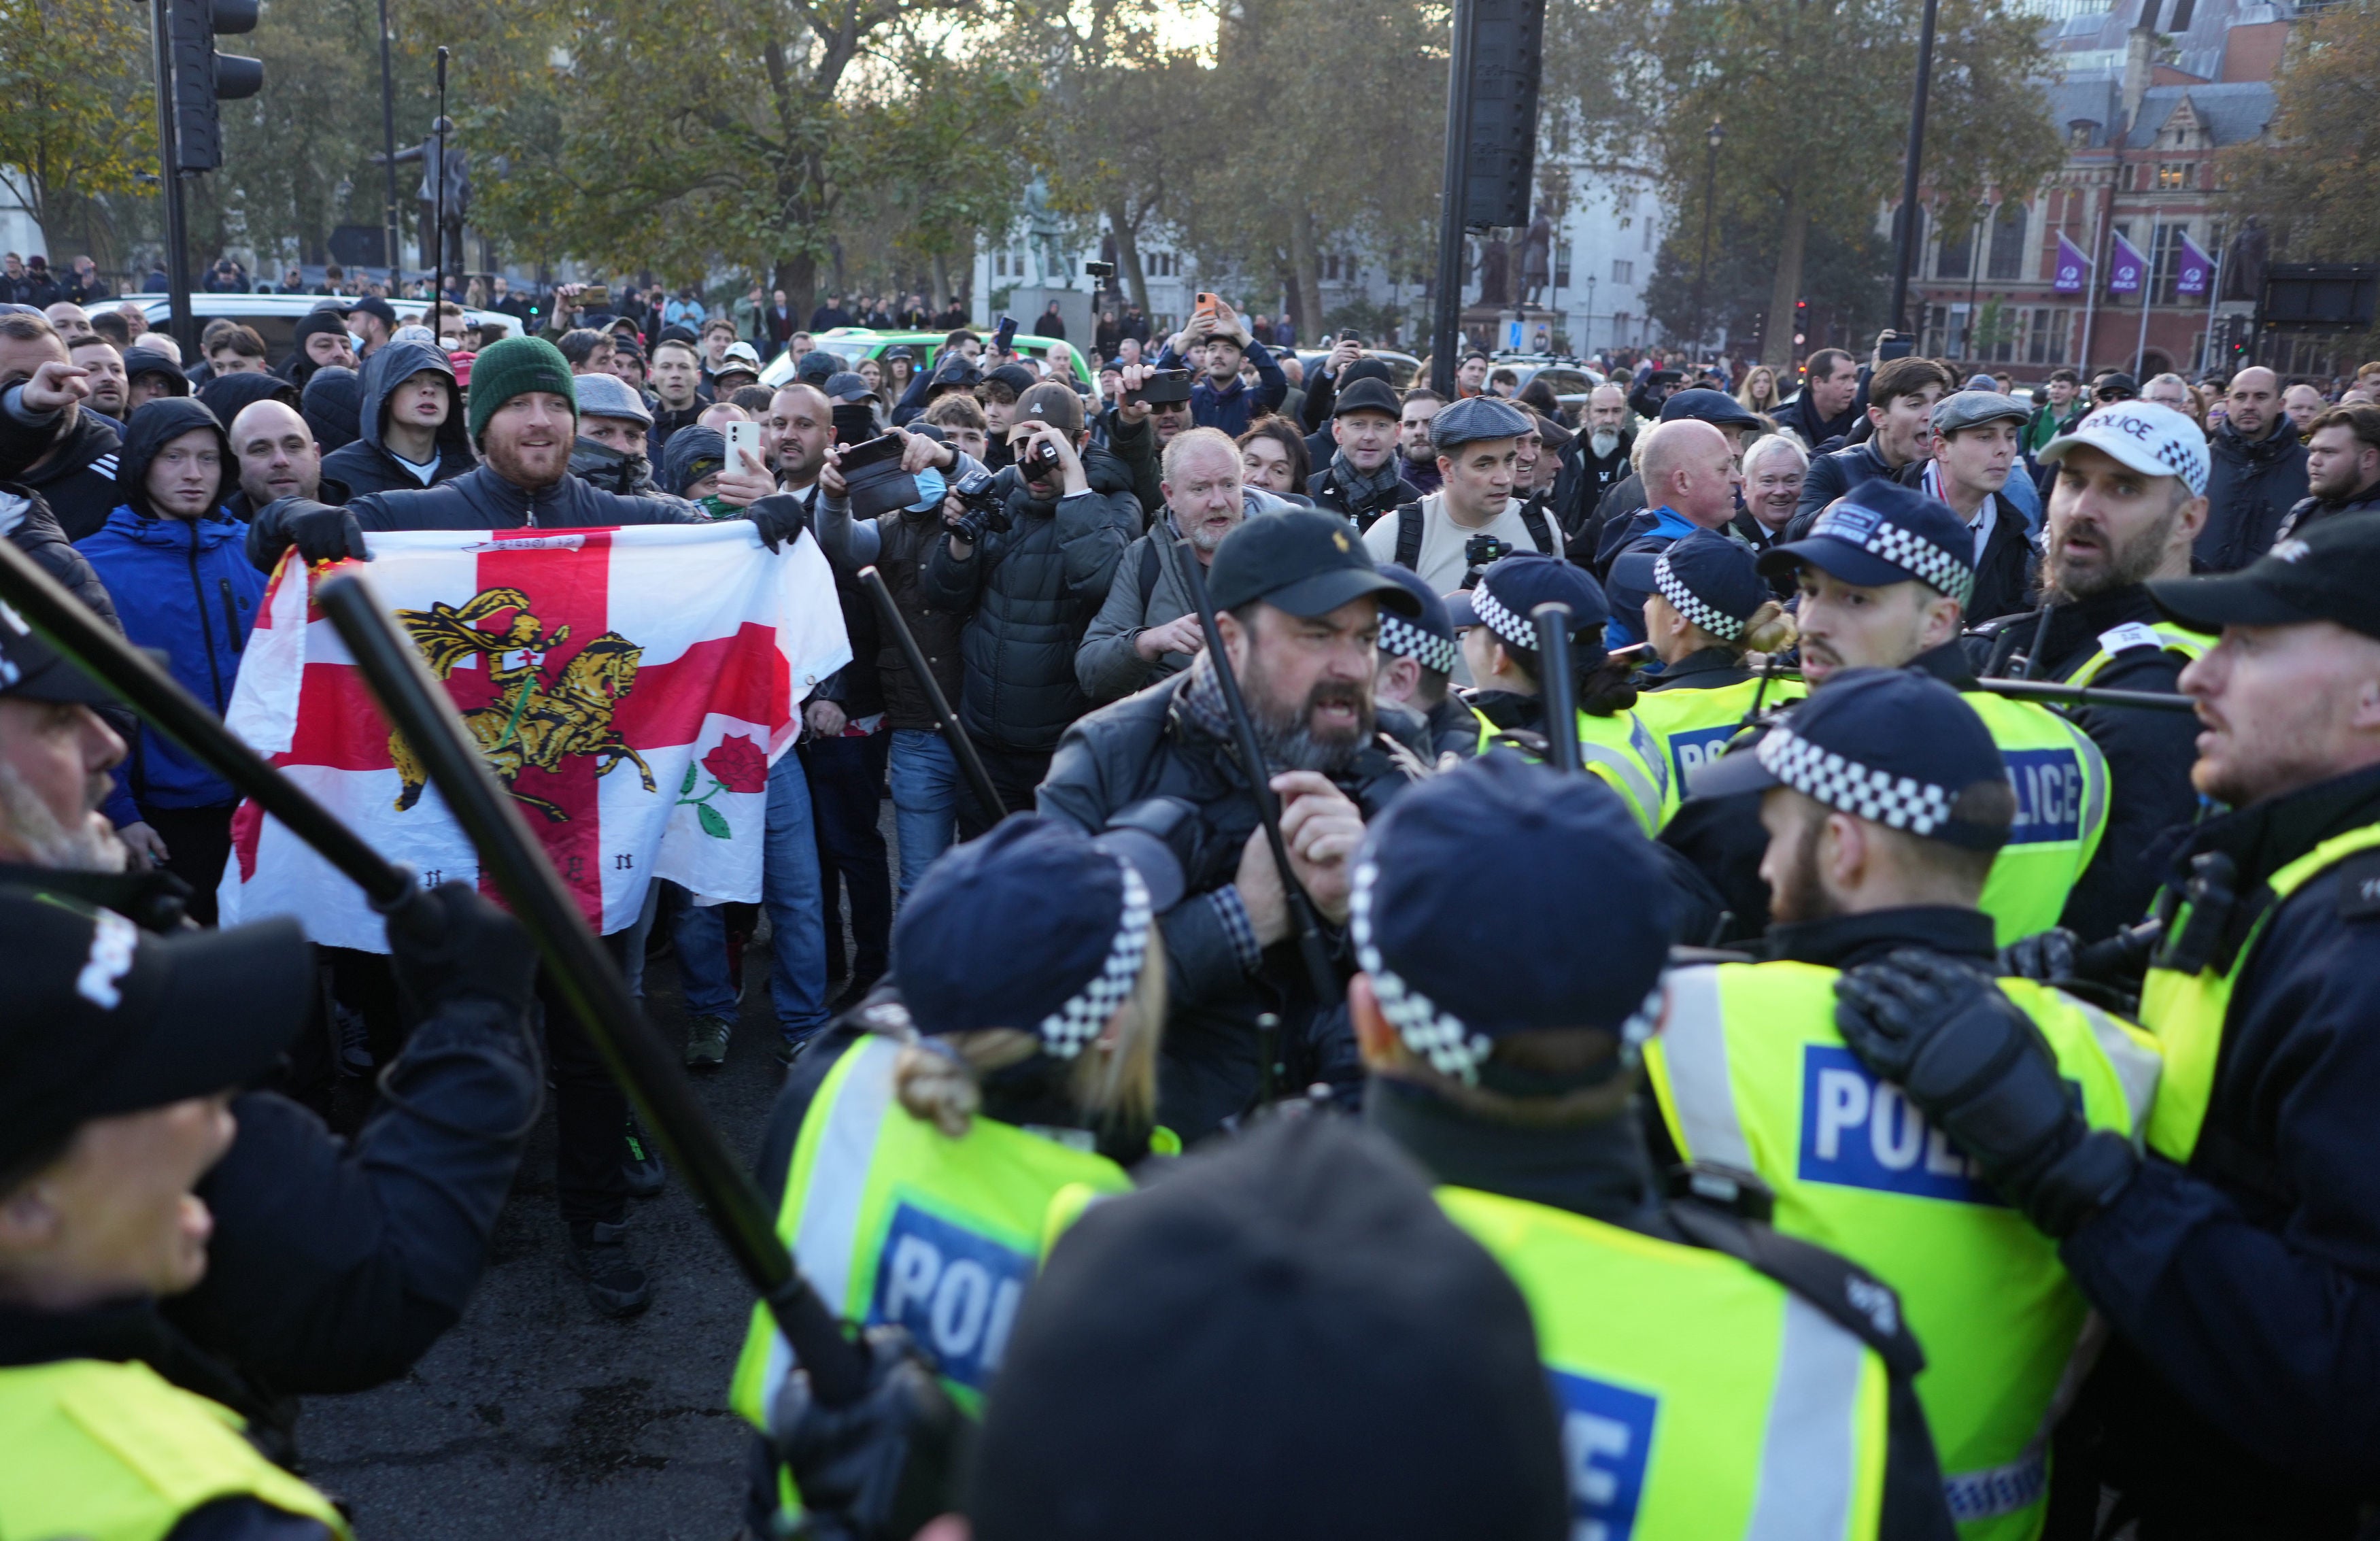 Counter-protesters clash with police in Parliament Square